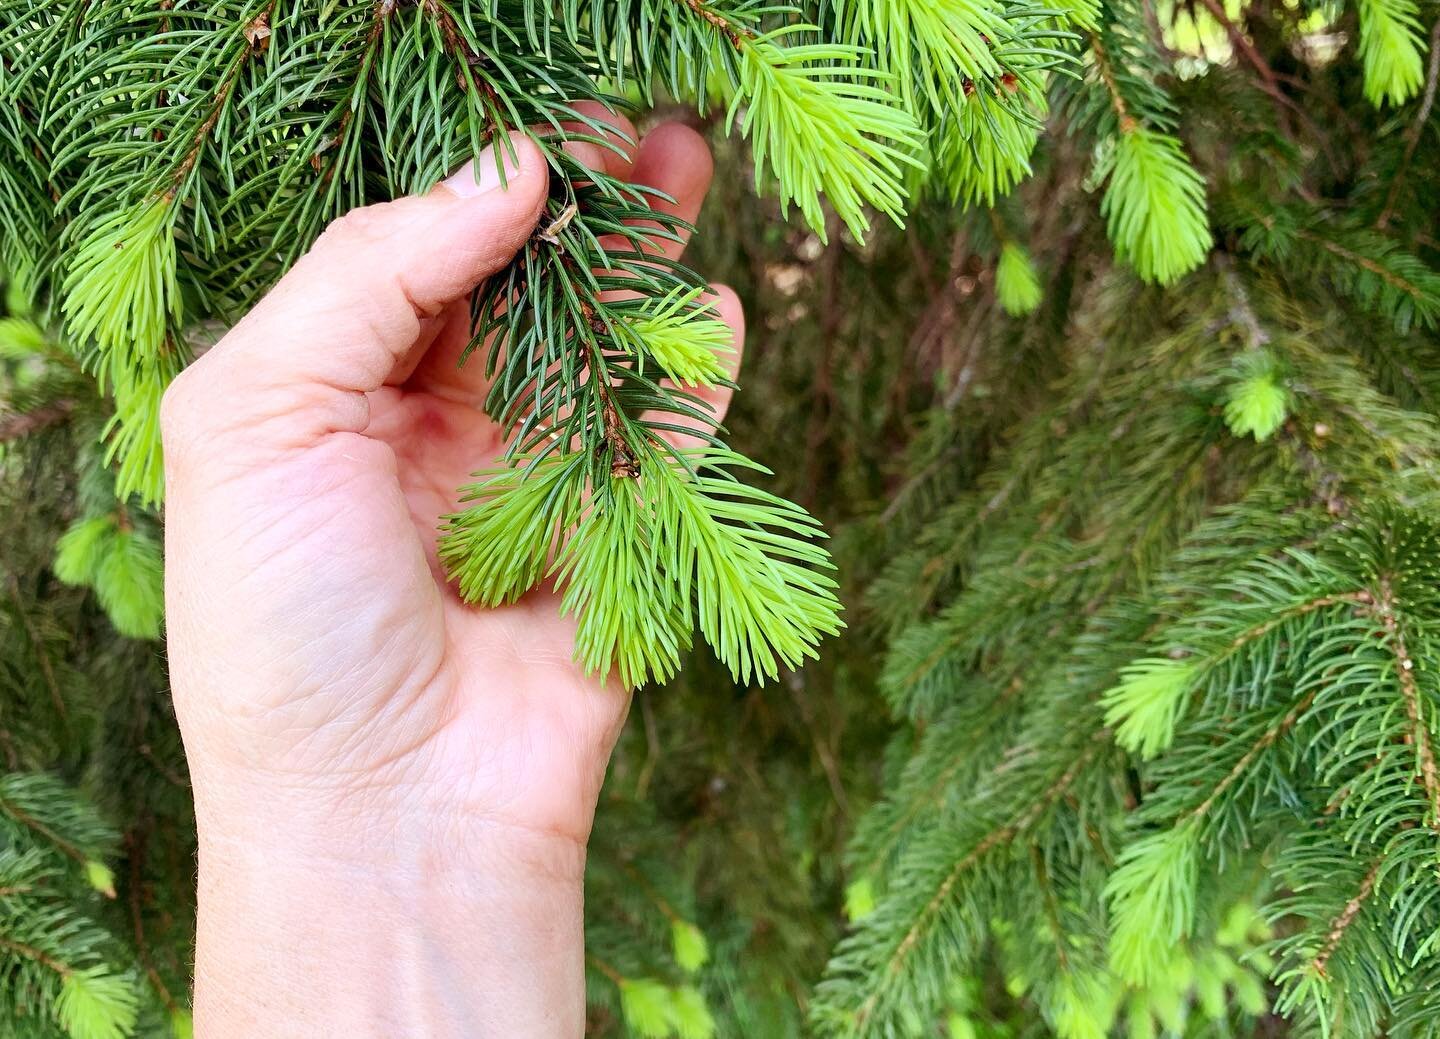 Forest foods! Bright, citrus, coniferous, and enlivening. 

Spruce tip harvest, mid spring

#agroforestry #forestfood #medicinalplants #herbalism #wildedibles #spruce #conifer #treecrops